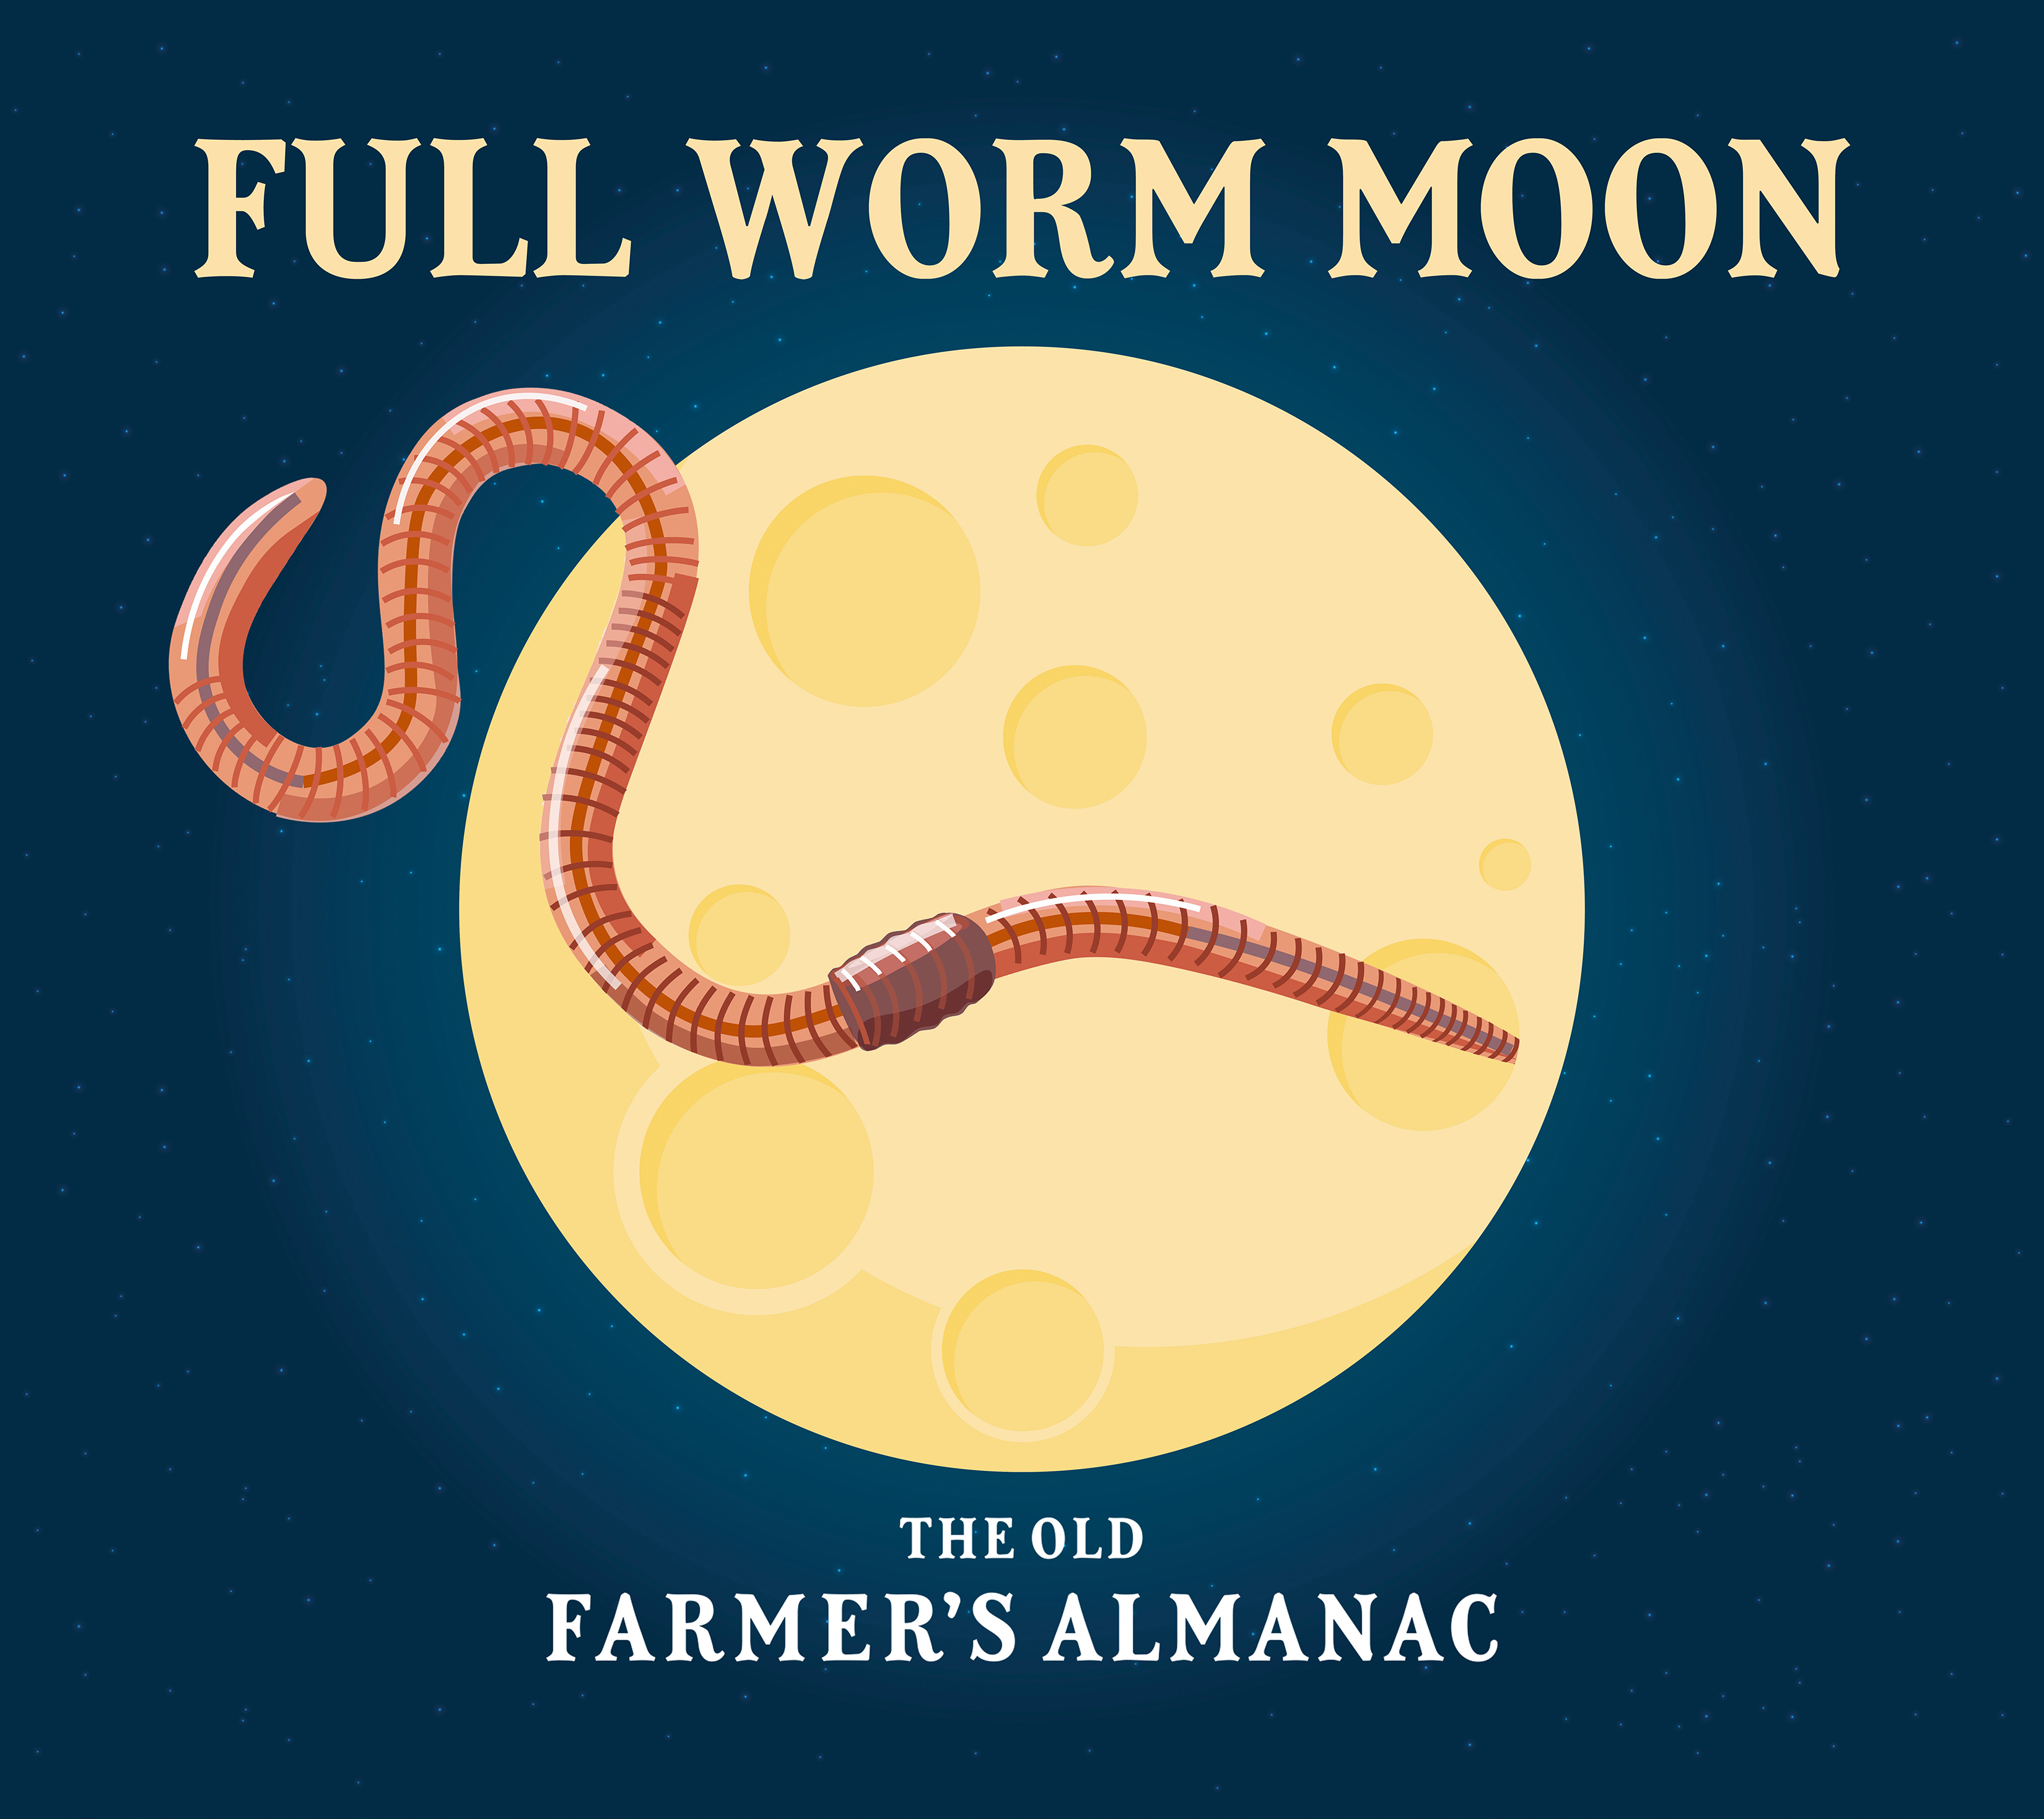 Full Moon in March 2020: The Super Worm Moon | The Old Farmer's ...